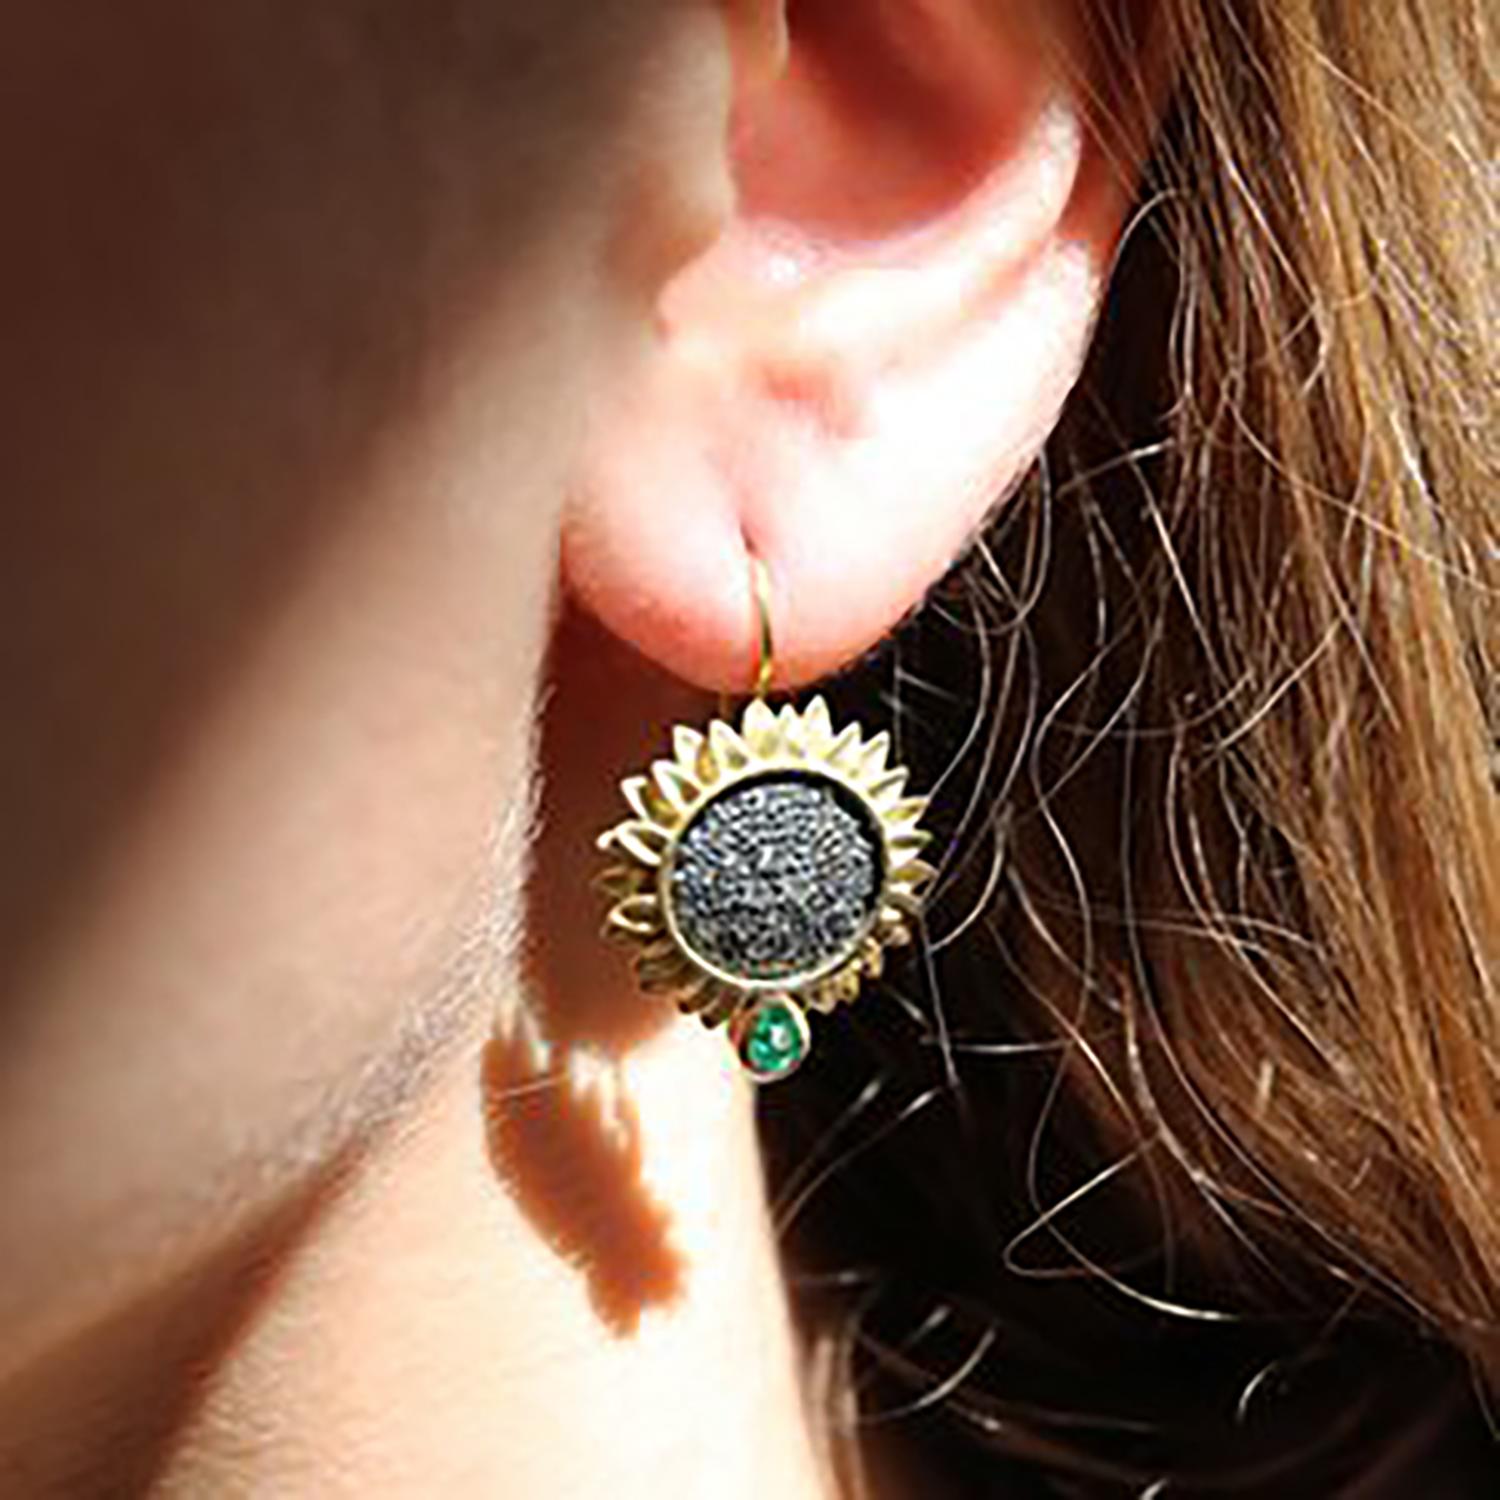 These sparkly sunflowers are even more eye-catching than the real thing!
Our sunflower earrings have 18k yellow gold petals surrounding oxidized silver with pave-set diamonds. The earrings are adorned with a matched set of  pear shaped emeralds,